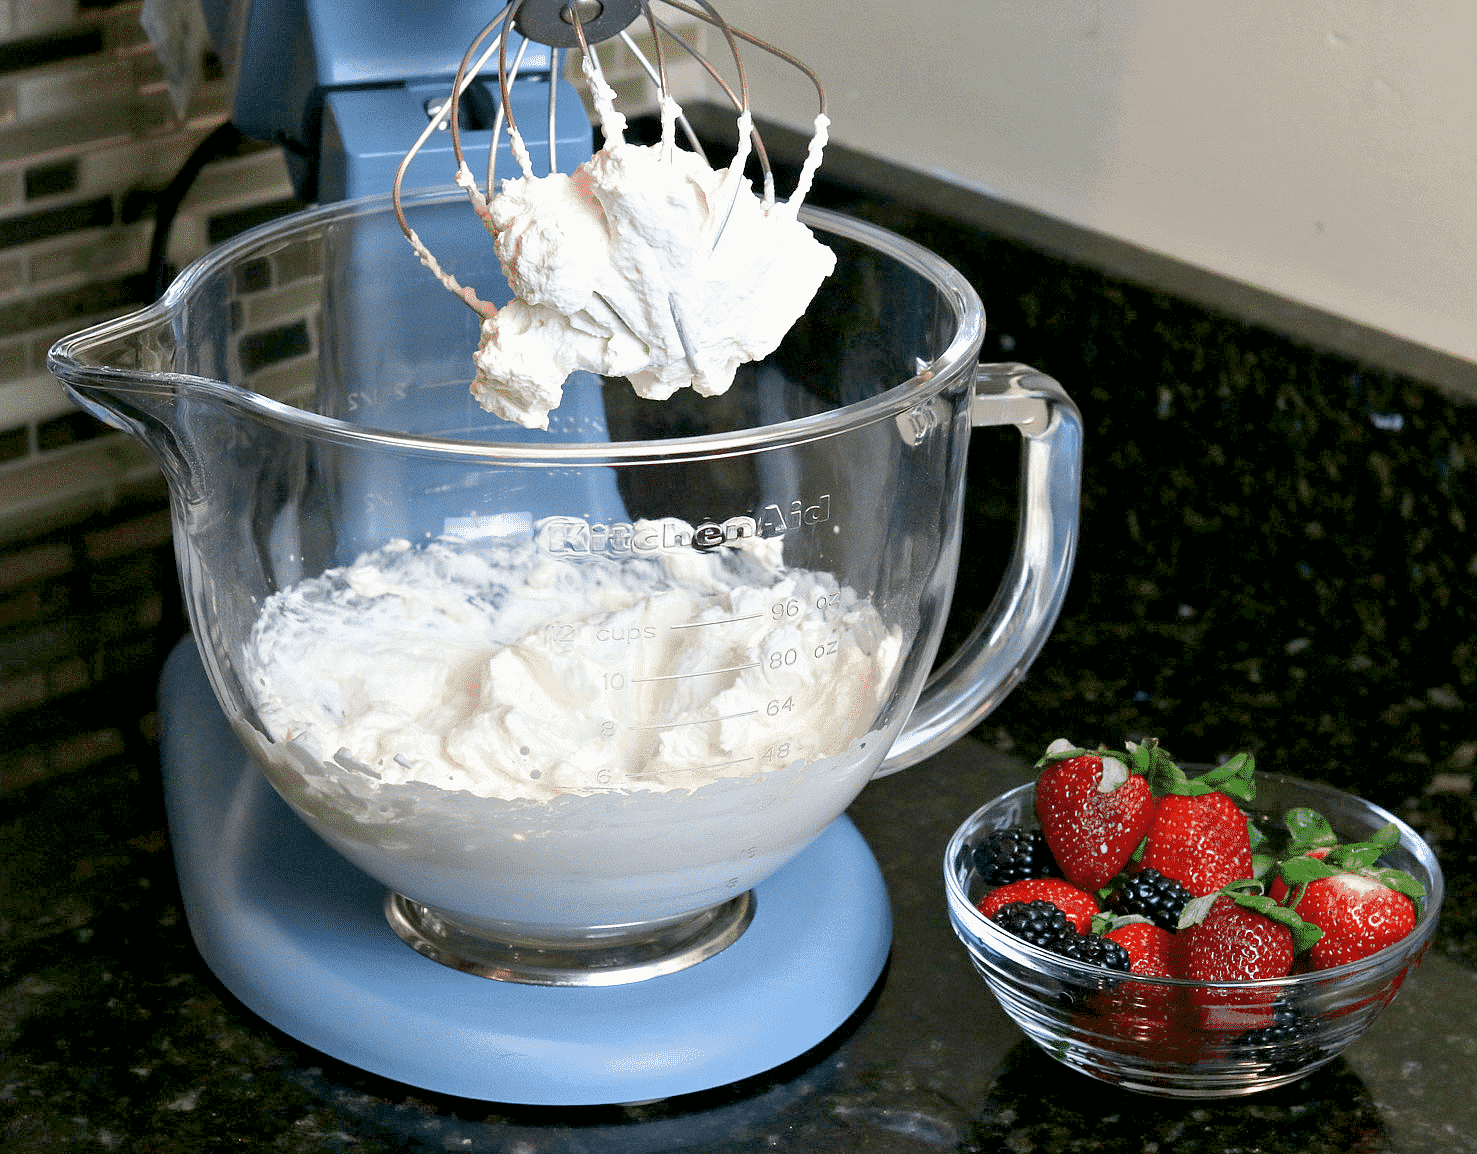 Keto Whipped Cream in a mixer bowl with berries